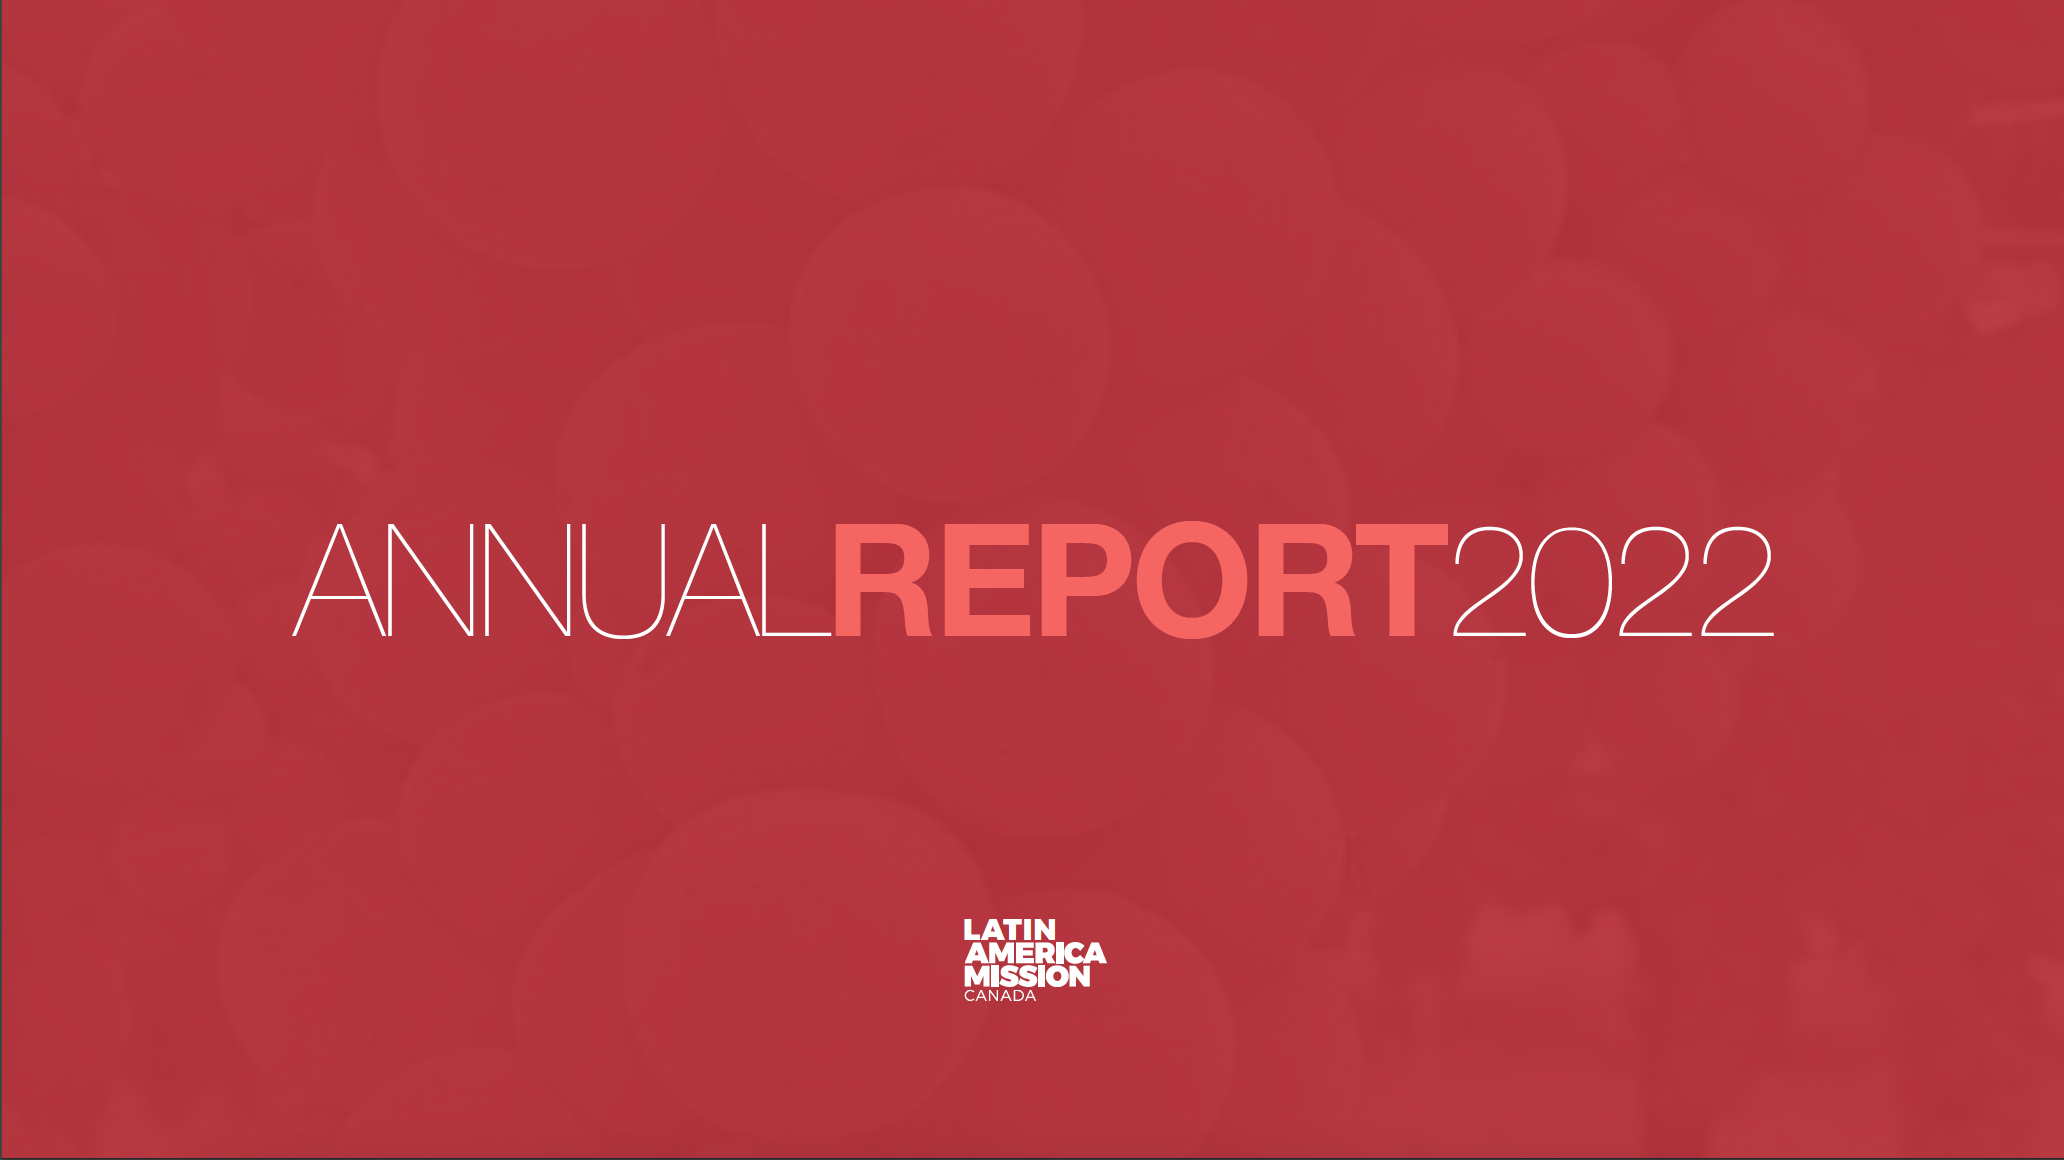 Read our 2022 Annual Report